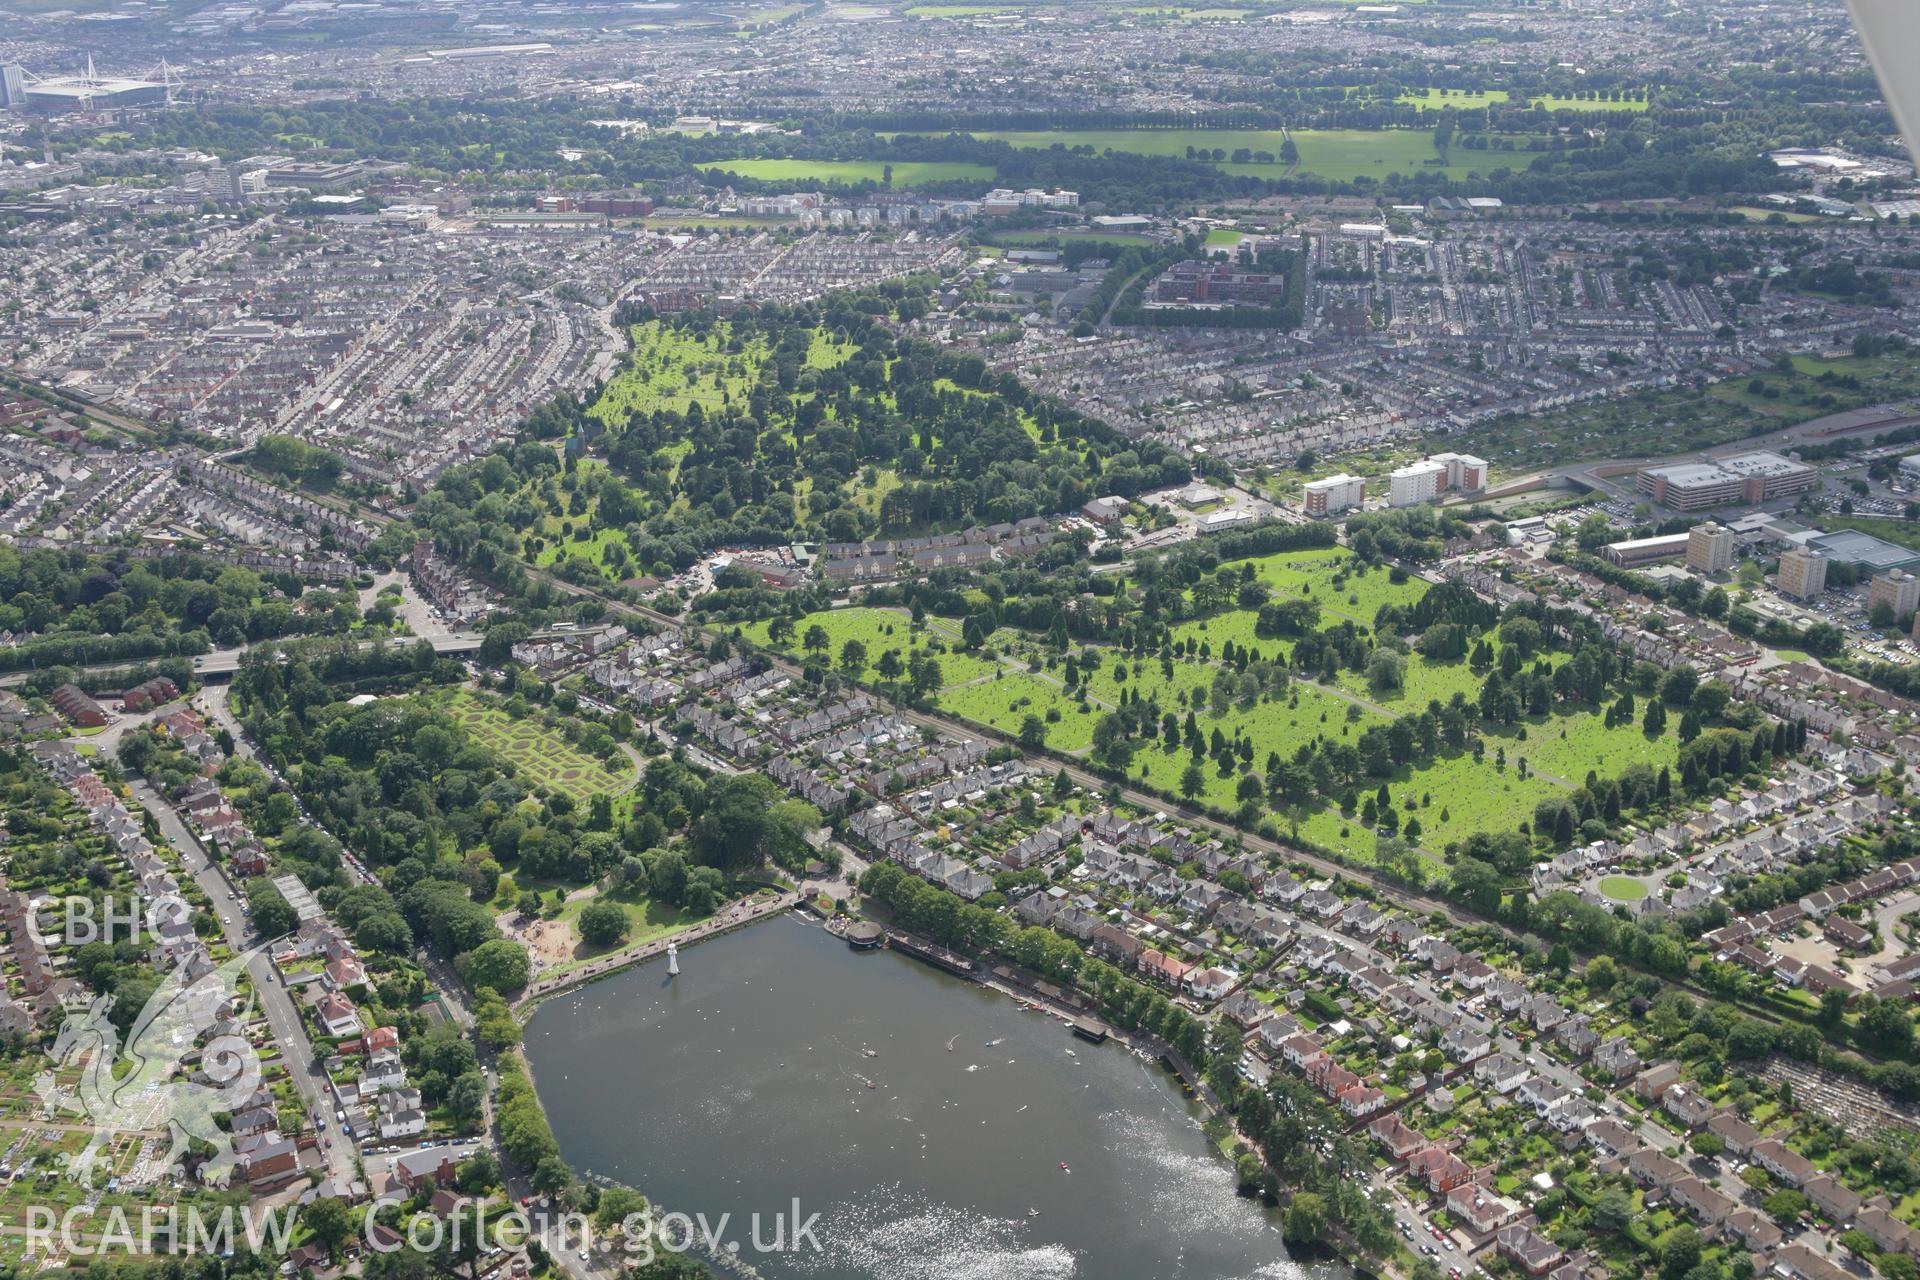 RCAHMW colour oblique aerial photograph of Roath Park, Cardiff. Taken on 30 July 2007 by Toby Driver